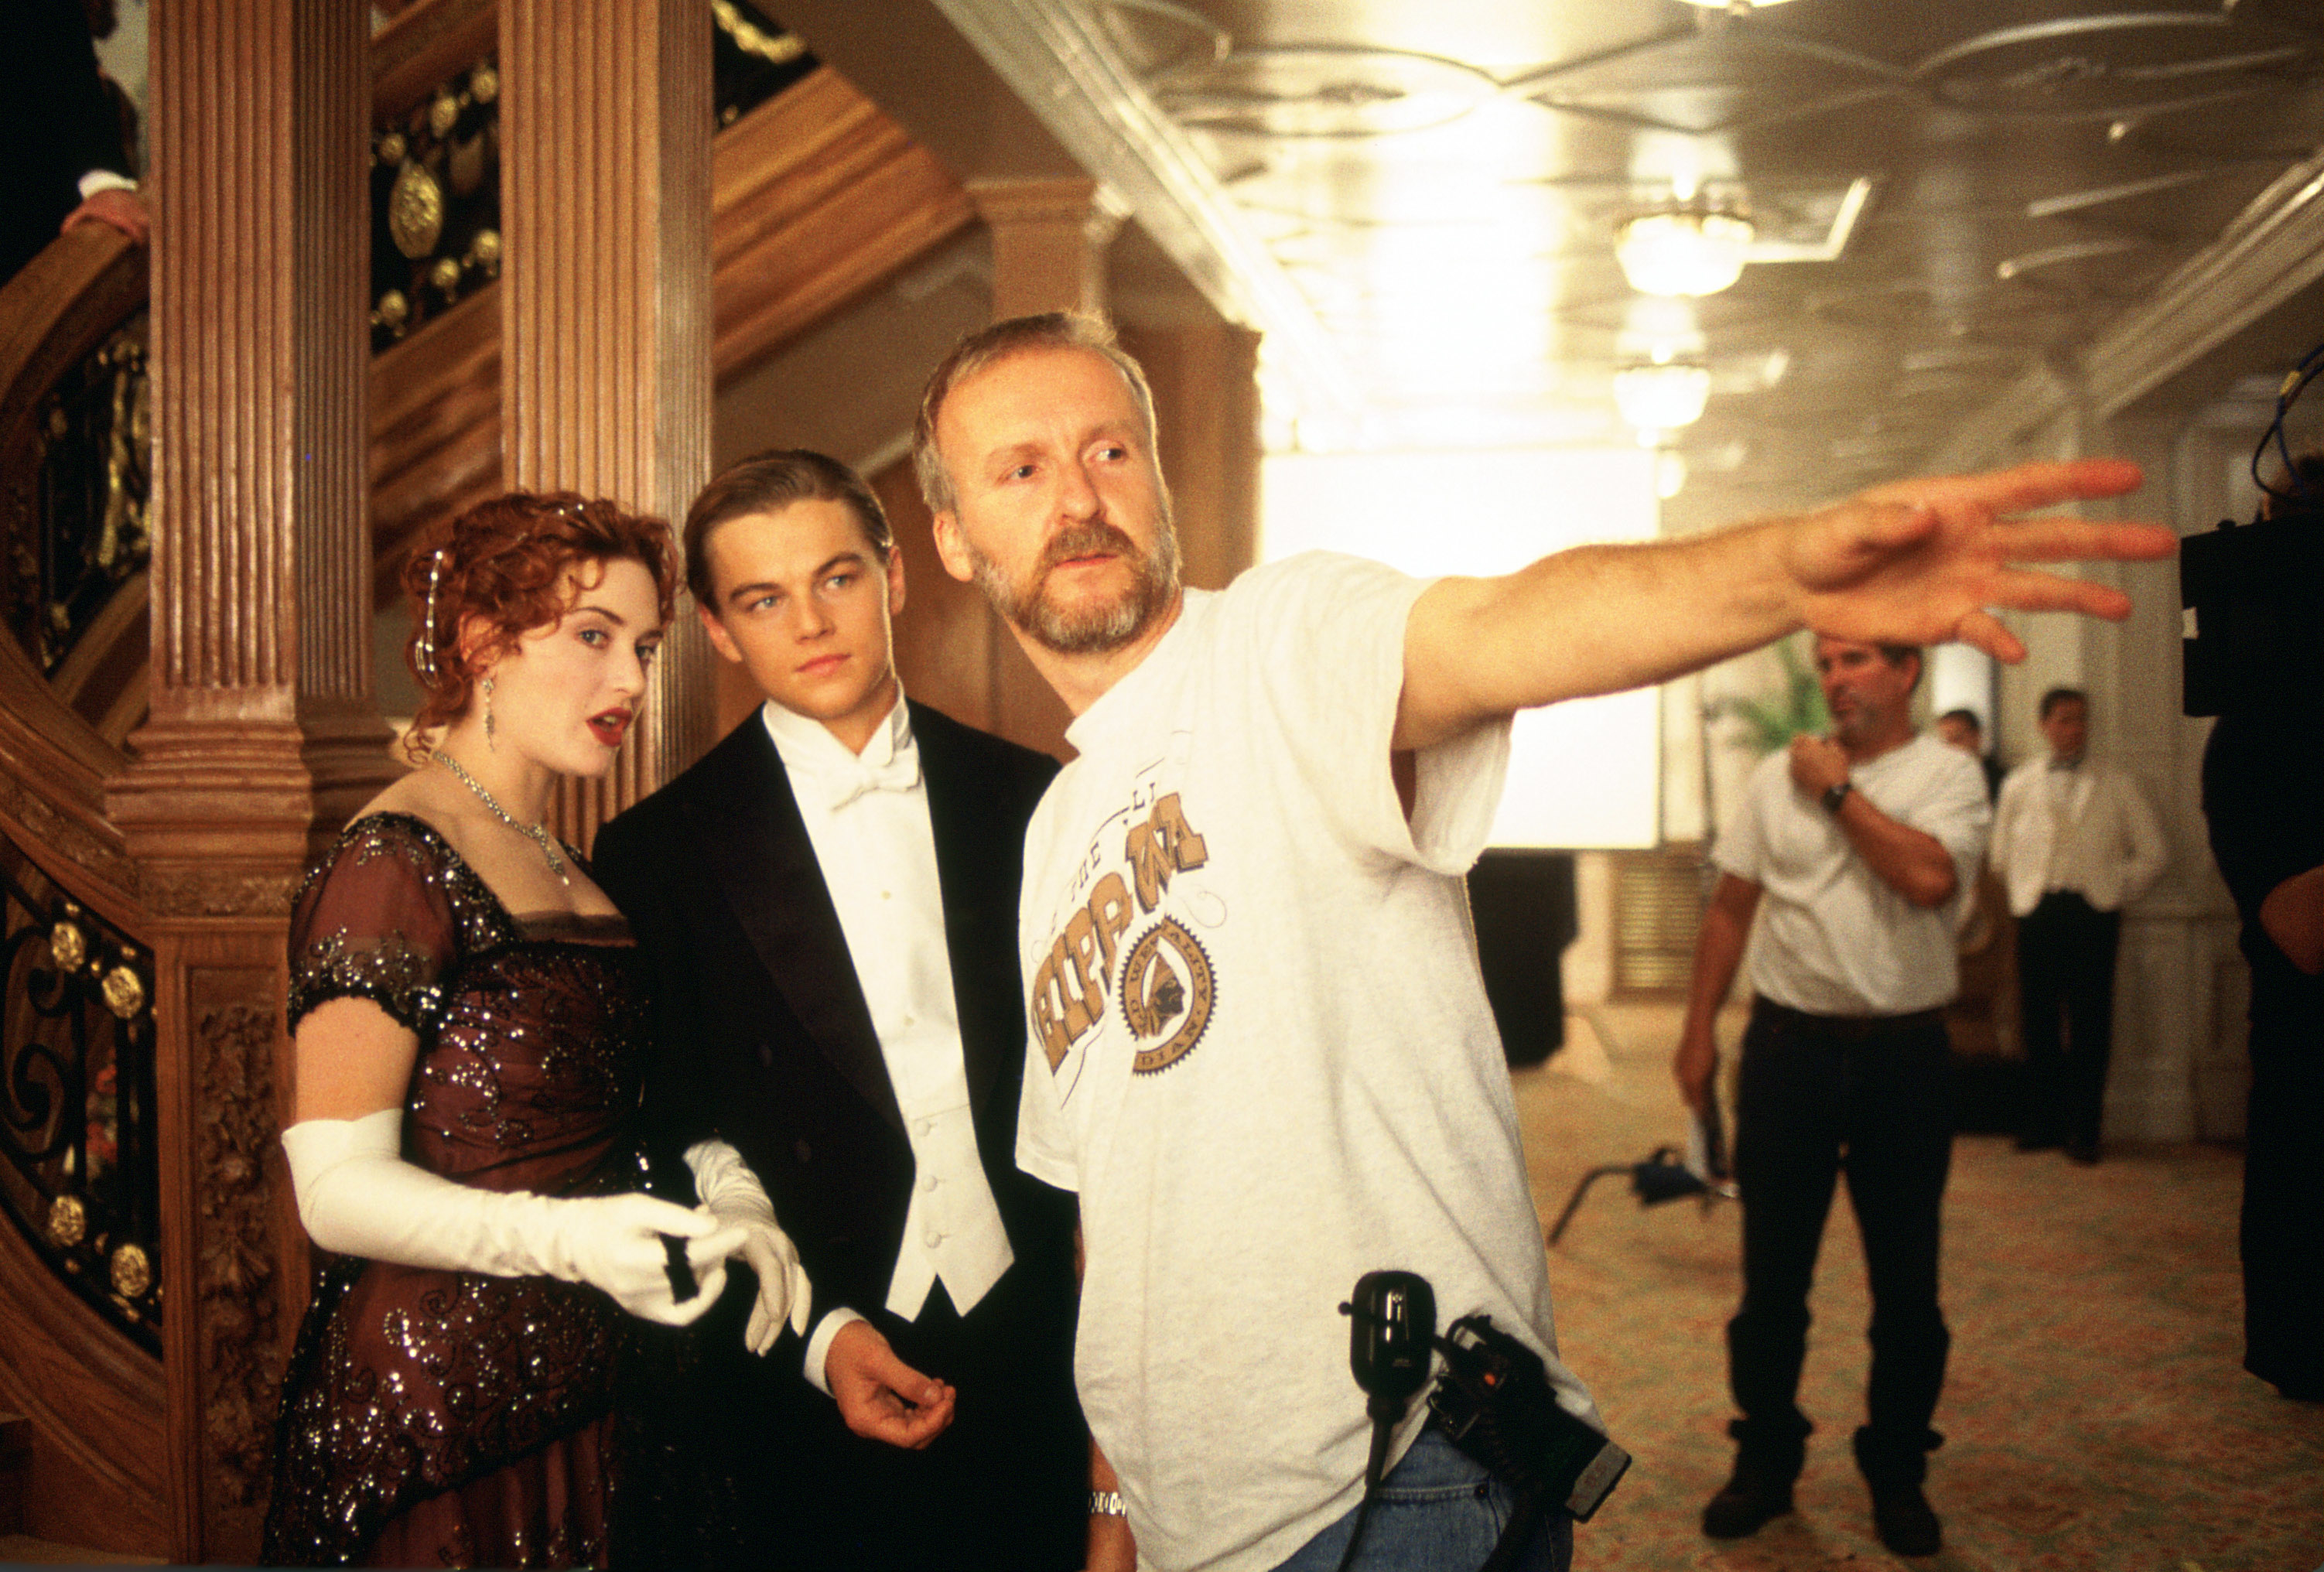 Director with actors on movie set, man points off-camera, both in vintage attire